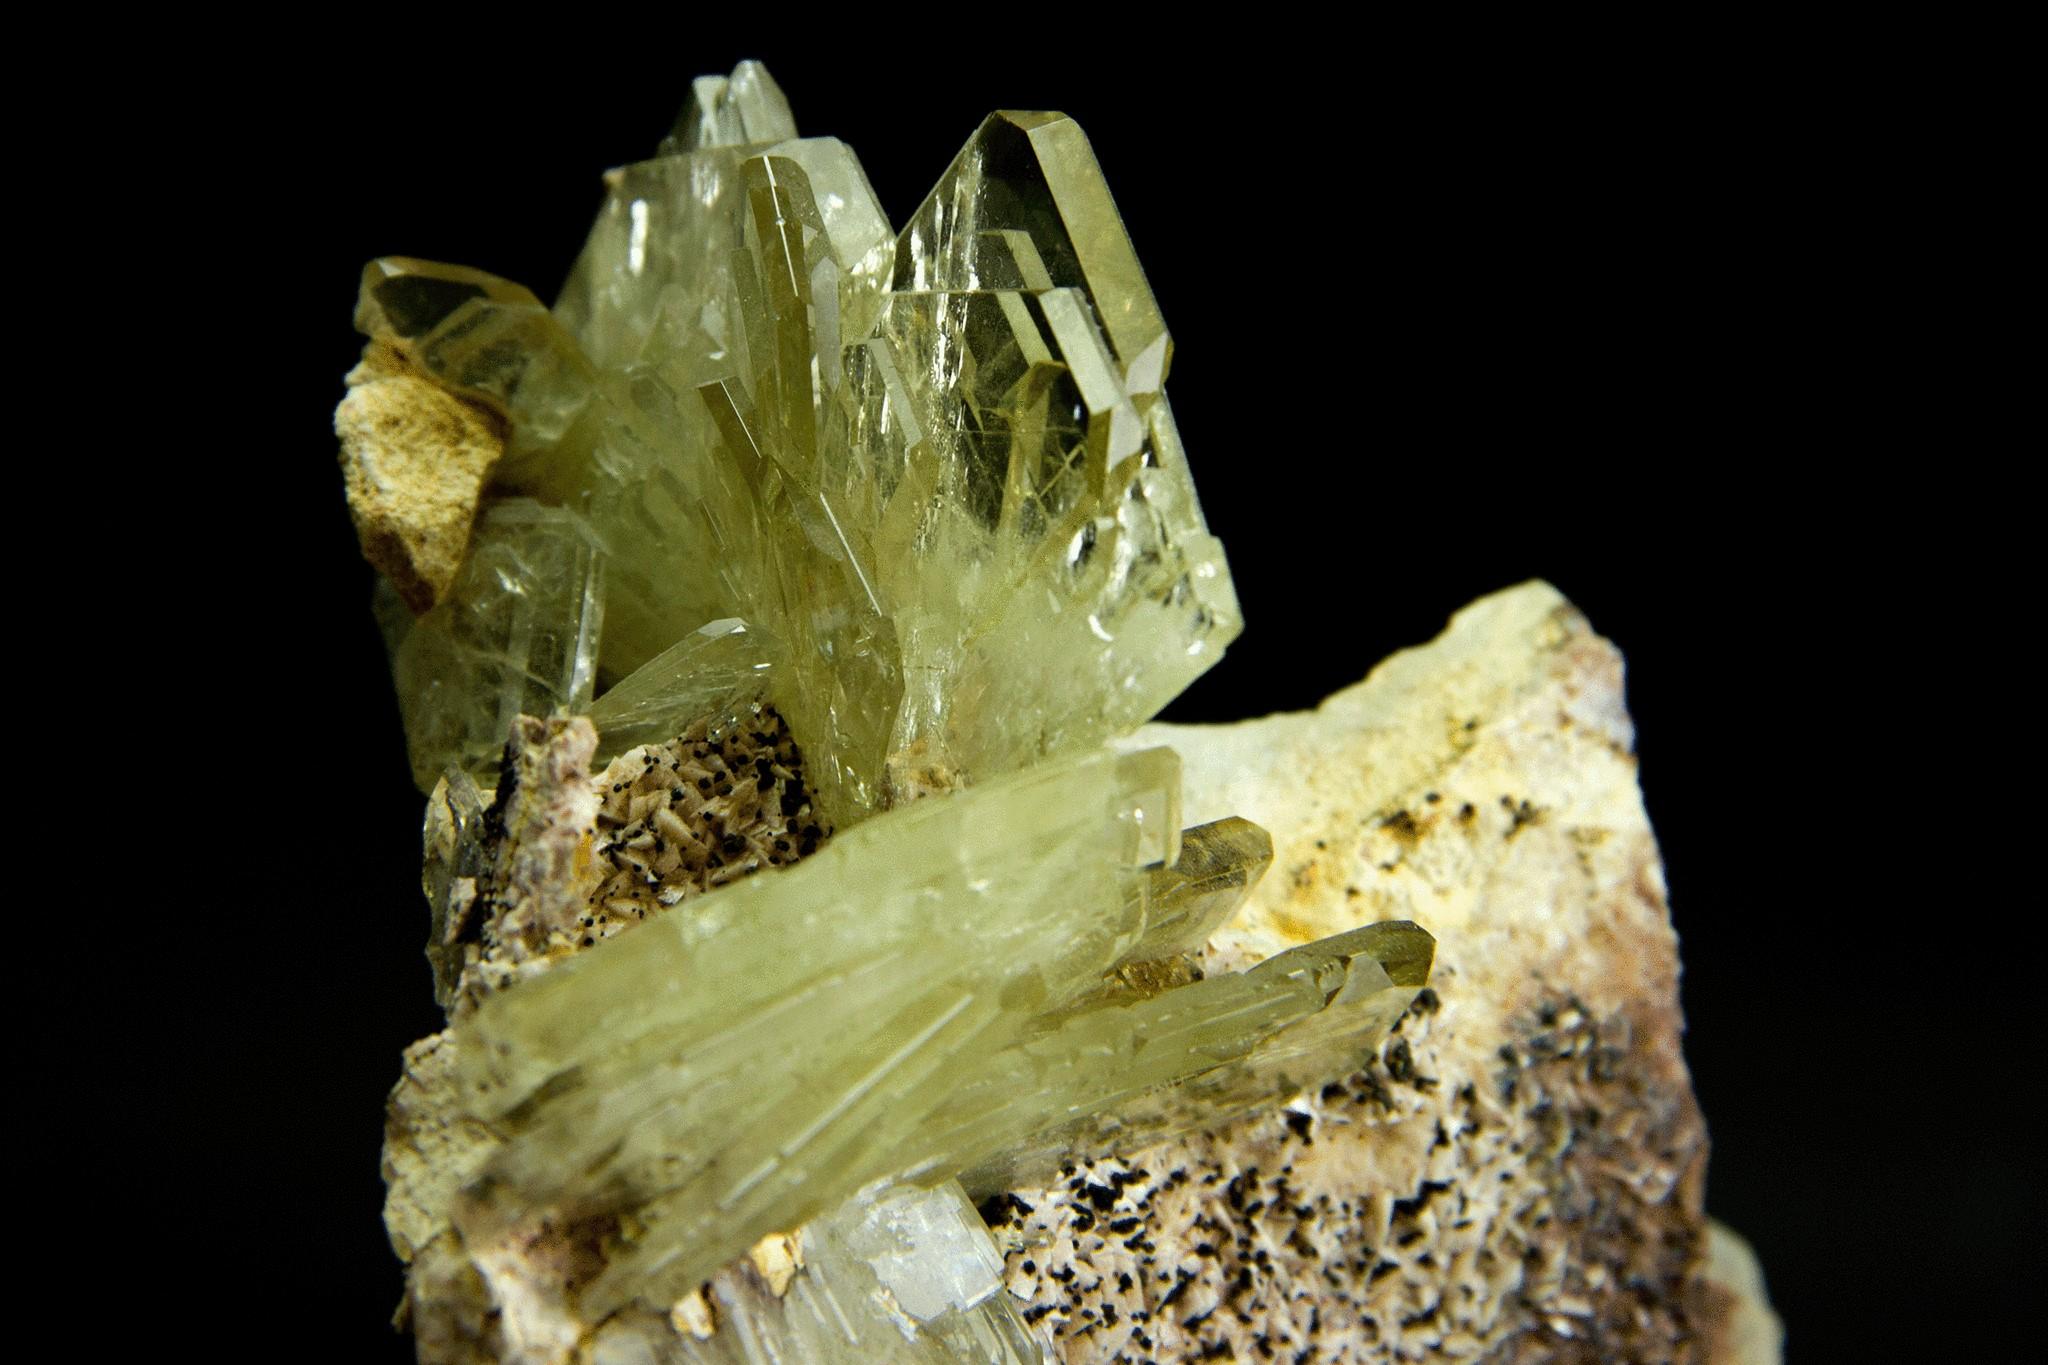 From Cerro Warihuyn, Huanuco, Peru

Lustrous cluster of smoky transparent flattened barite crystals in parallel growth on brown matrix. The barite crystals are tabular rectangular blades with sharp edge faces all throughout the crystal with a smoky